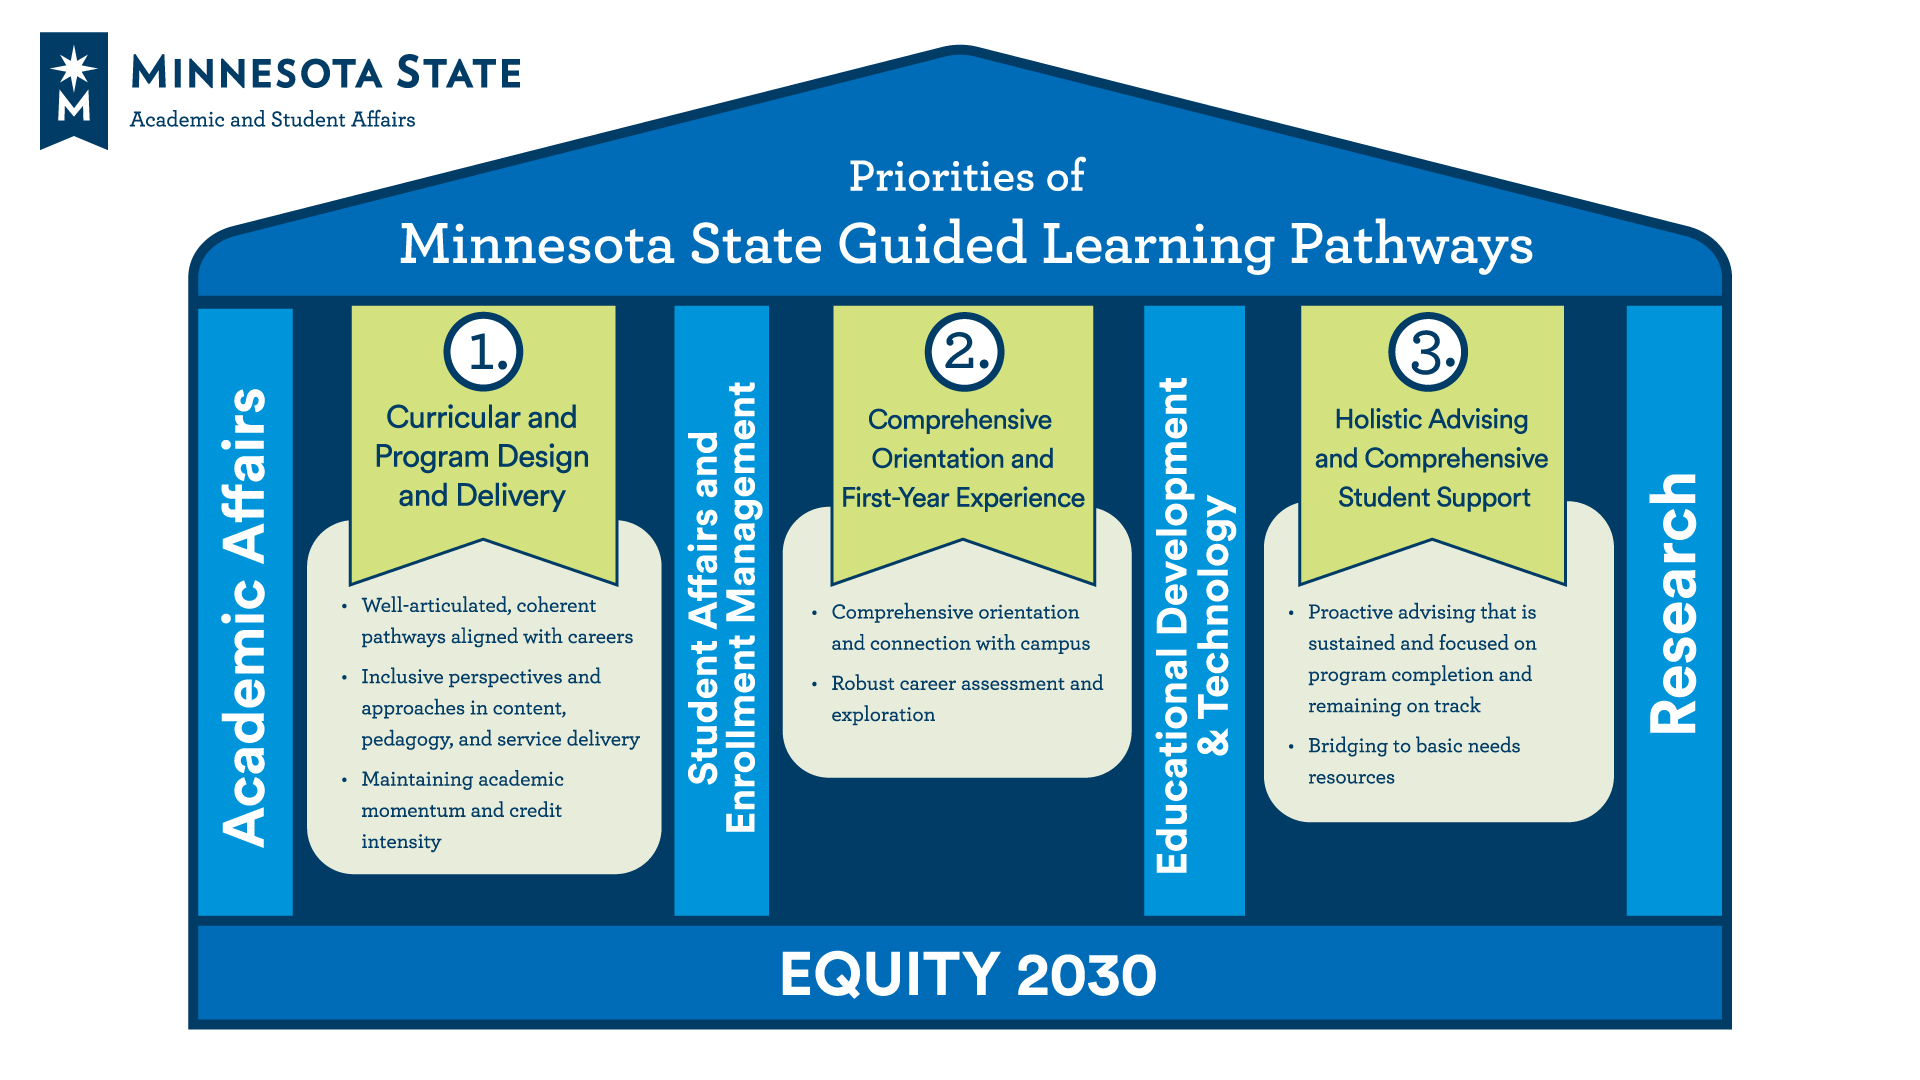 Minnesota State Guided Learning Pathways